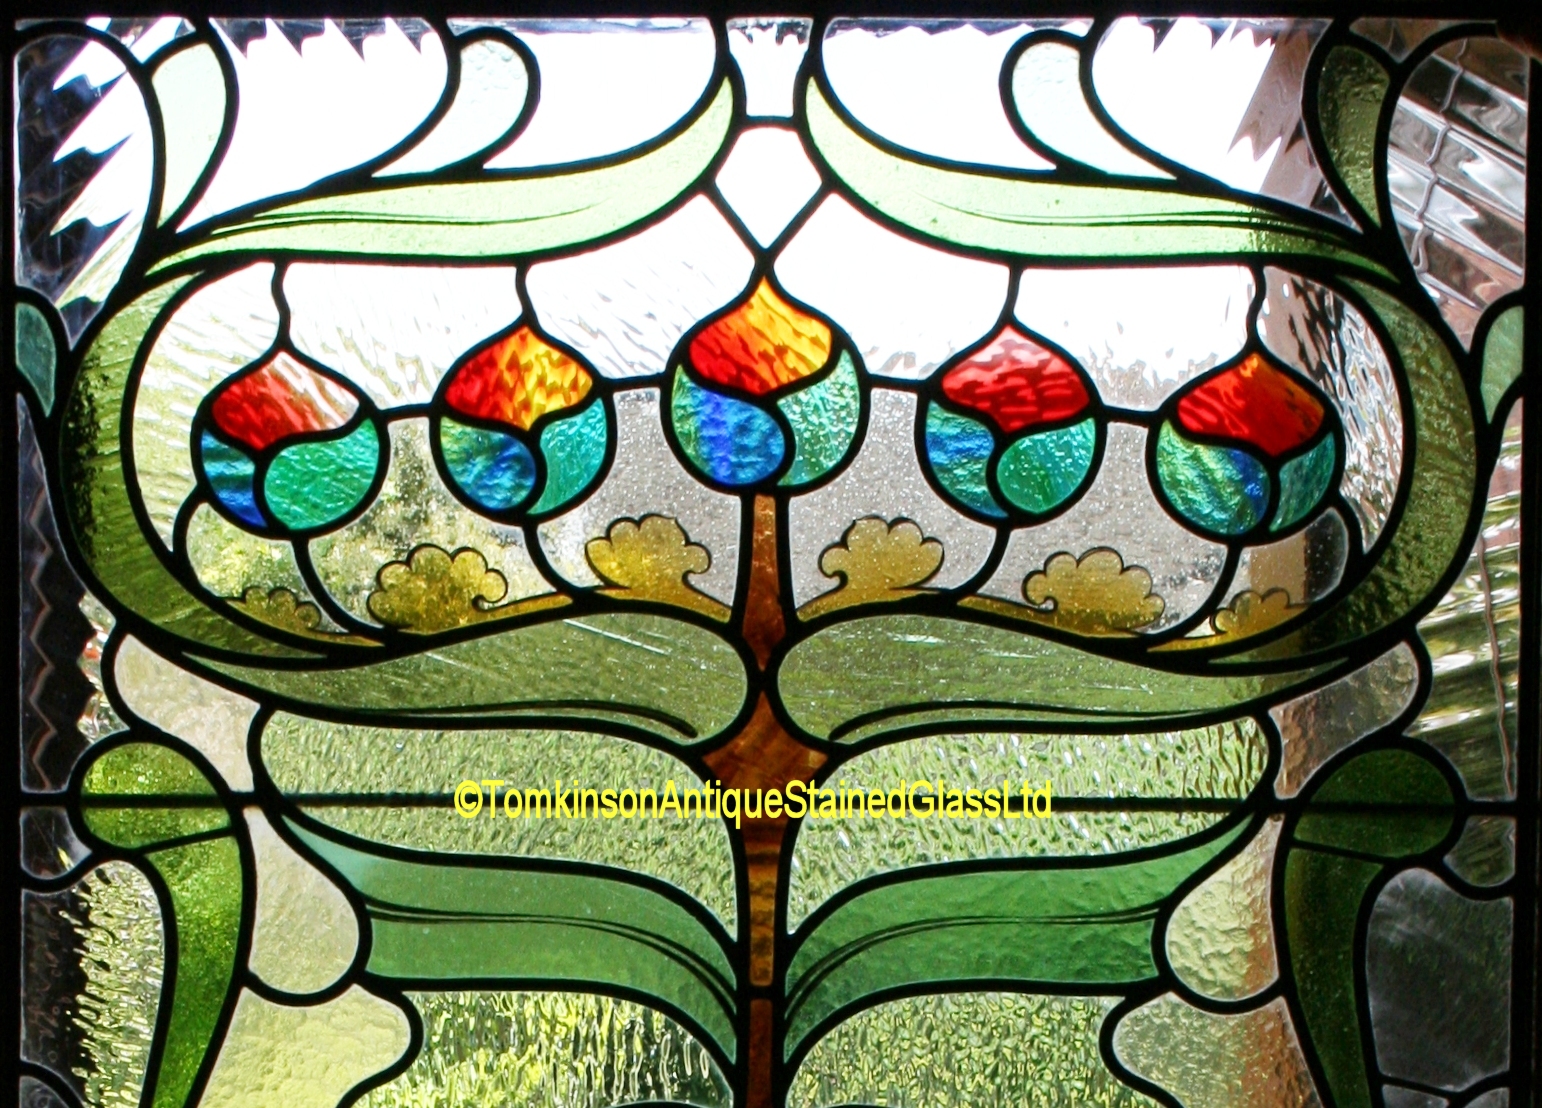 Ref Ed331 2 Edwardian Stained Glass Windows Art Nouveau Tomkinson Stained Glass